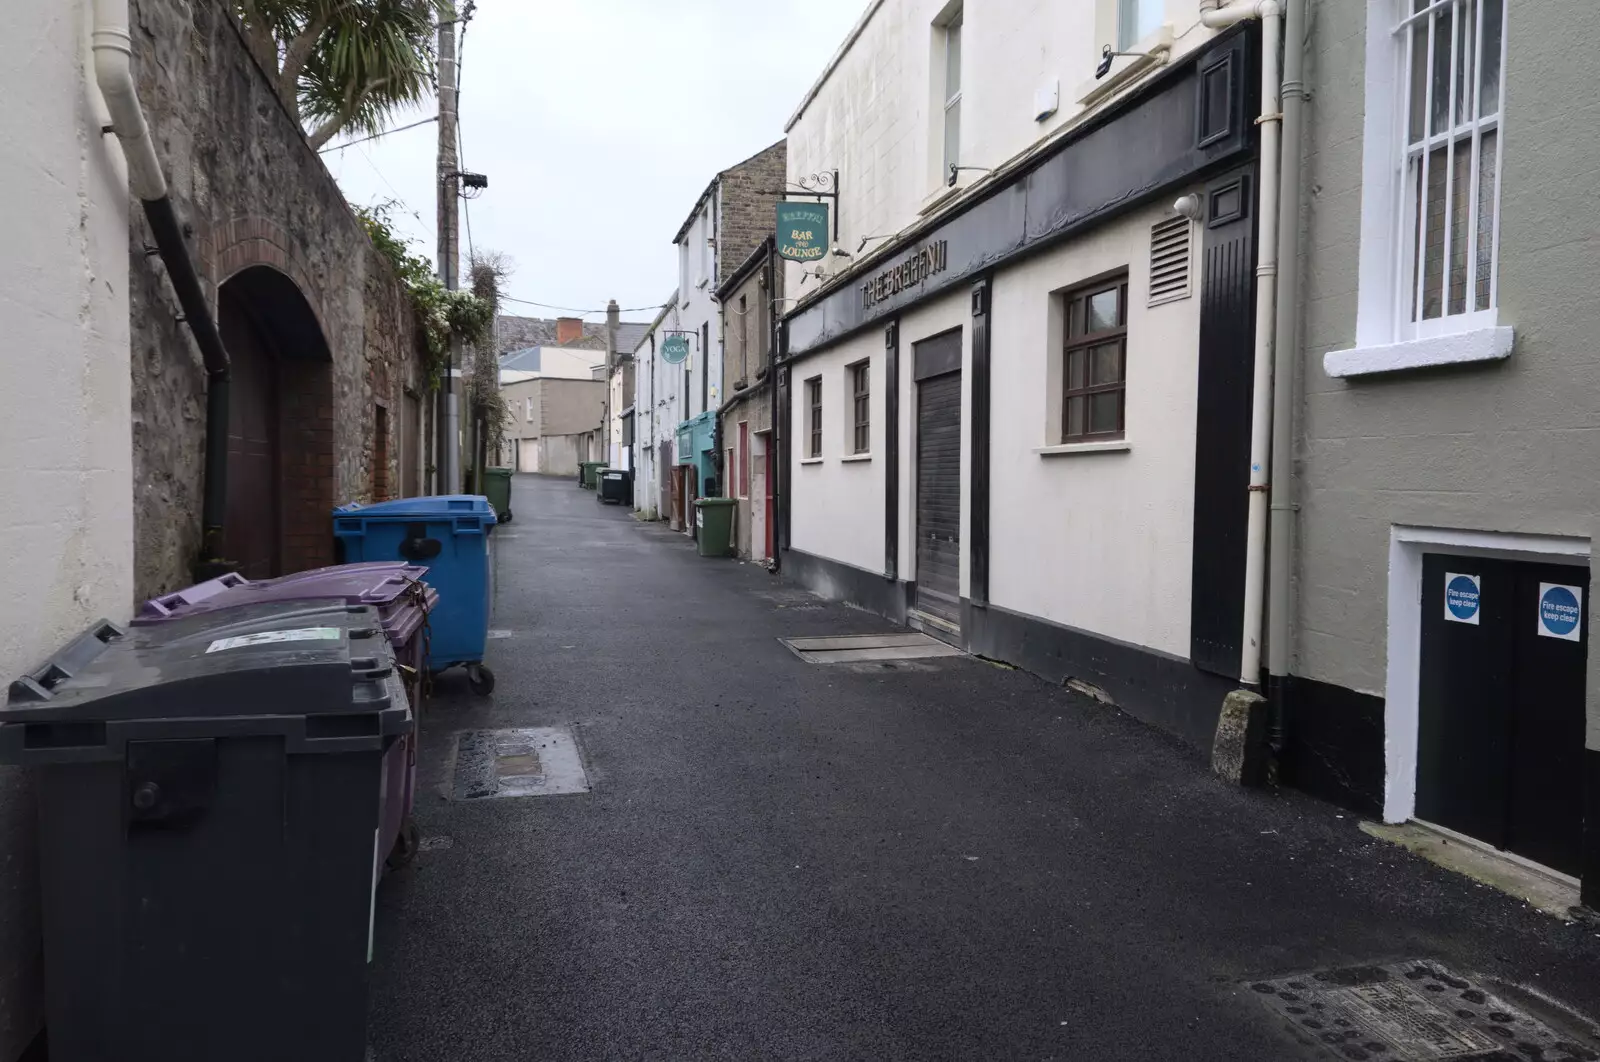 Idrone Lane - the back alley behind the Breffni, from The End of the Breffni, Blackrock, Dublin - 18th February 2023